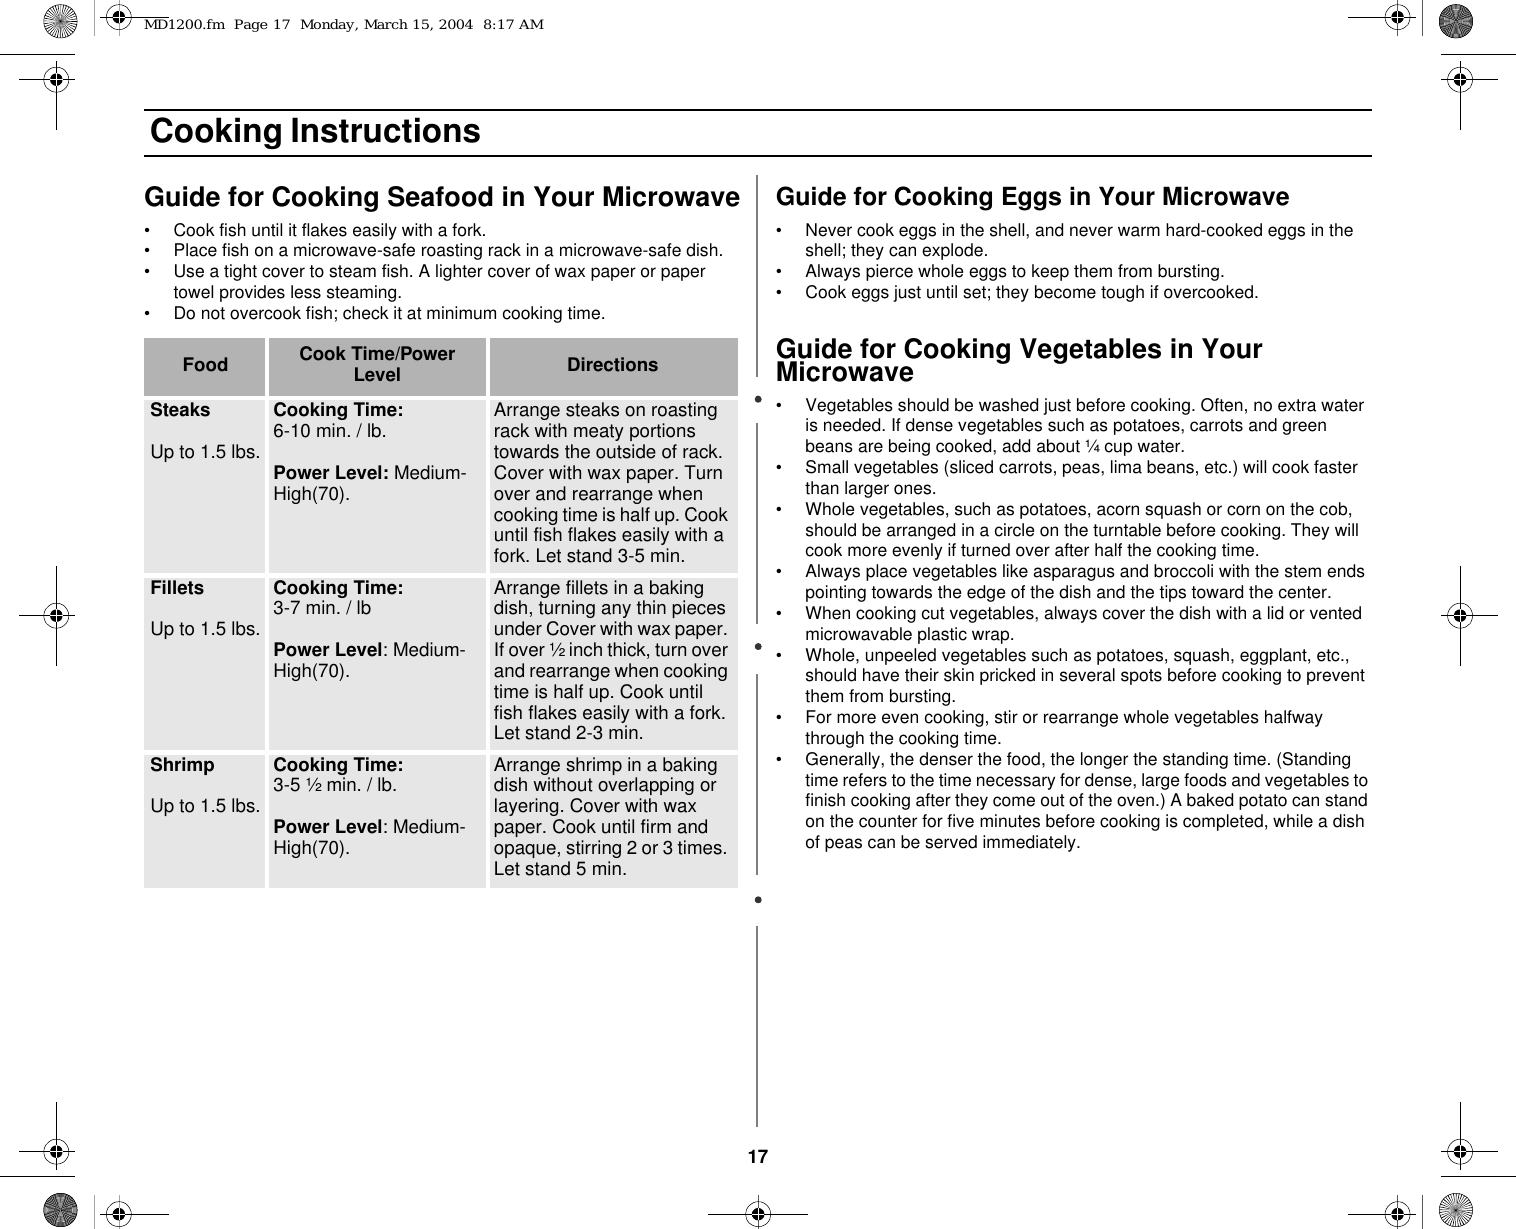 17 Cooking InstructionsGuide for Cooking Seafood in Your Microwave• Cook fish until it flakes easily with a fork.• Place fish on a microwave-safe roasting rack in a microwave-safe dish.• Use a tight cover to steam fish. A lighter cover of wax paper or paper towel provides less steaming.• Do not overcook fish; check it at minimum cooking time.Guide for Cooking Eggs in Your Microwave• Never cook eggs in the shell, and never warm hard-cooked eggs in the shell; they can explode.• Always pierce whole eggs to keep them from bursting.• Cook eggs just until set; they become tough if overcooked.Guide for Cooking Vegetables in Your Microwave• Vegetables should be washed just before cooking. Often, no extra water is needed. If dense vegetables such as potatoes, carrots and green beans are being cooked, add about ¼ cup water.• Small vegetables (sliced carrots, peas, lima beans, etc.) will cook faster than larger ones.• Whole vegetables, such as potatoes, acorn squash or corn on the cob, should be arranged in a circle on the turntable before cooking. They will cook more evenly if turned over after half the cooking time.• Always place vegetables like asparagus and broccoli with the stem ends pointing towards the edge of the dish and the tips toward the center.• When cooking cut vegetables, always cover the dish with a lid or vented microwavable plastic wrap.• Whole, unpeeled vegetables such as potatoes, squash, eggplant, etc., should have their skin pricked in several spots before cooking to prevent them from bursting.• For more even cooking, stir or rearrange whole vegetables halfway through the cooking time.• Generally, the denser the food, the longer the standing time. (Standing time refers to the time necessary for dense, large foods and vegetables to finish cooking after they come out of the oven.) A baked potato can stand on the counter for five minutes before cooking is completed, while a dish of peas can be served immediately.Food Cook Time/Power Level DirectionsSteaksUp to 1.5 lbs.Cooking Time: 6-10 min. / lb. Power Level: Medium-High(70).Arrange steaks on roasting rack with meaty portions towards the outside of rack. Cover with wax paper. Turn over and rearrange when cooking time is half up. Cook until fish flakes easily with a fork. Let stand 3-5 min. FilletsUp to 1.5 lbs.Cooking Time: 3-7 min. / lbPower Level: Medium-High(70).Arrange fillets in a baking dish, turning any thin pieces under Cover with wax paper. If over ½ inch thick, turn over and rearrange when cooking time is half up. Cook until fish flakes easily with a fork. Let stand 2-3 min.ShrimpUp to 1.5 lbs.Cooking Time: 3-5 ½ min. / lb.Power Level: Medium-High(70).Arrange shrimp in a baking dish without overlapping or layering. Cover with wax paper. Cook until firm and opaque, stirring 2 or 3 times. Let stand 5 min. MD1200.fm  Page 17  Monday, March 15, 2004  8:17 AM